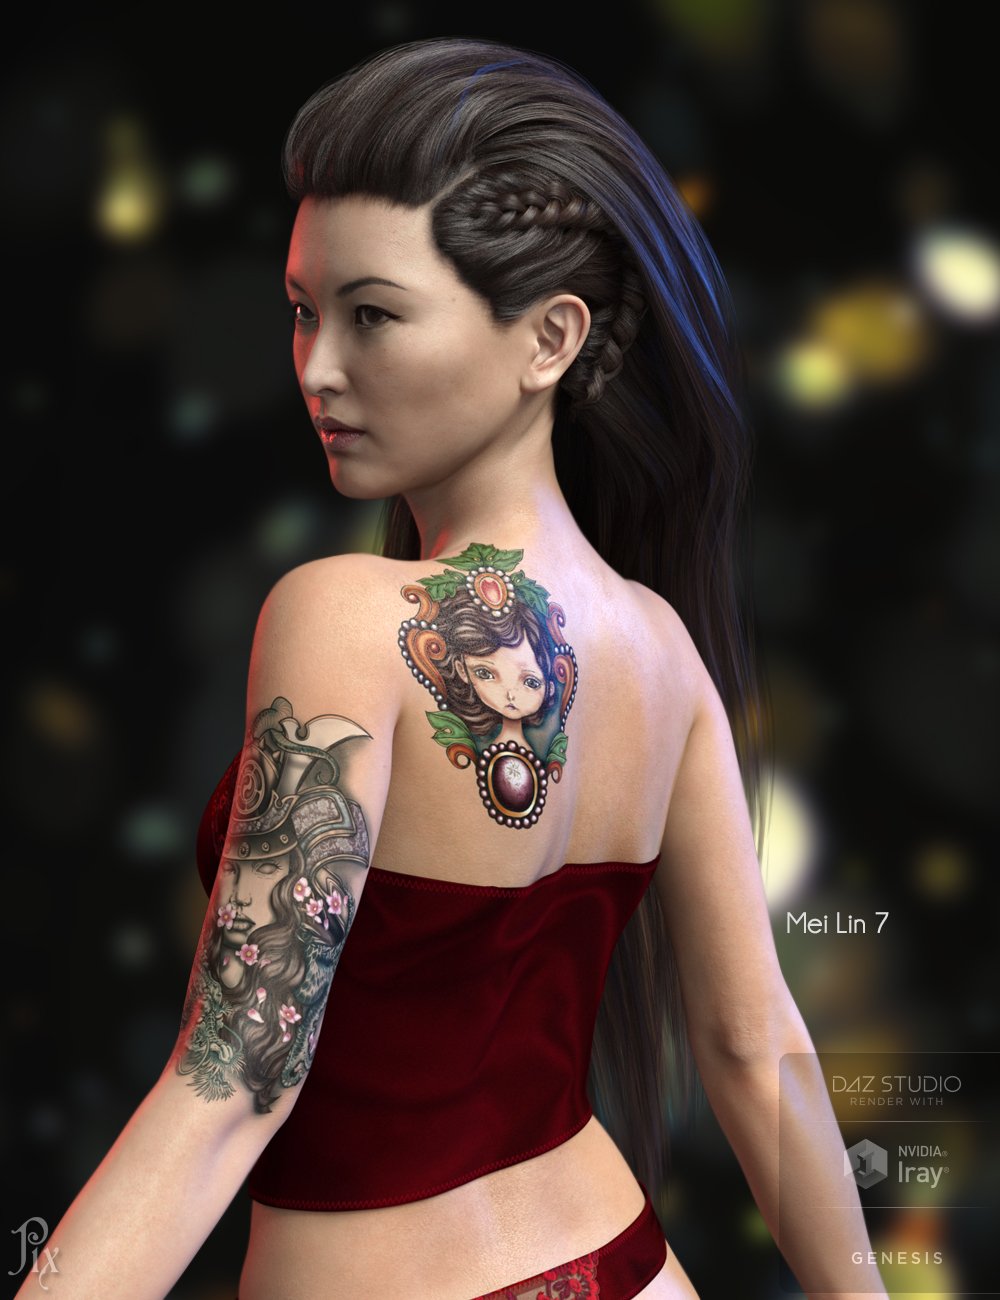 SkinWorks L.I.E. Tattoos for Genesis 3 and 8 by: Pixeluna, 3D Models by Daz 3D